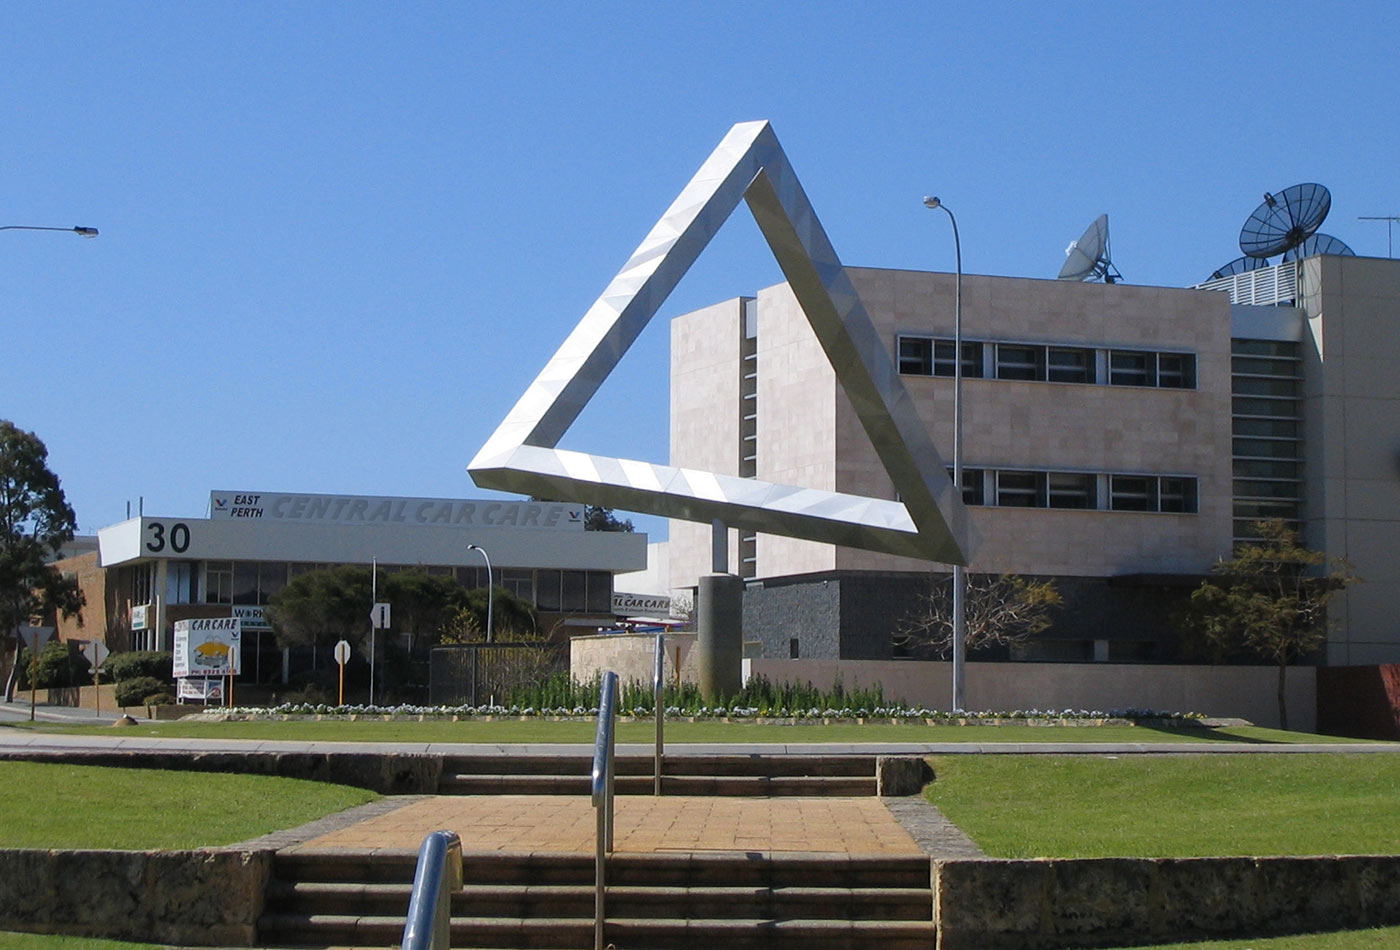 "Impossible Triangle," sculpture by Brian MacKay and Ahmad Abas, Claisebrook roundabout, East Perth, Western Australia.